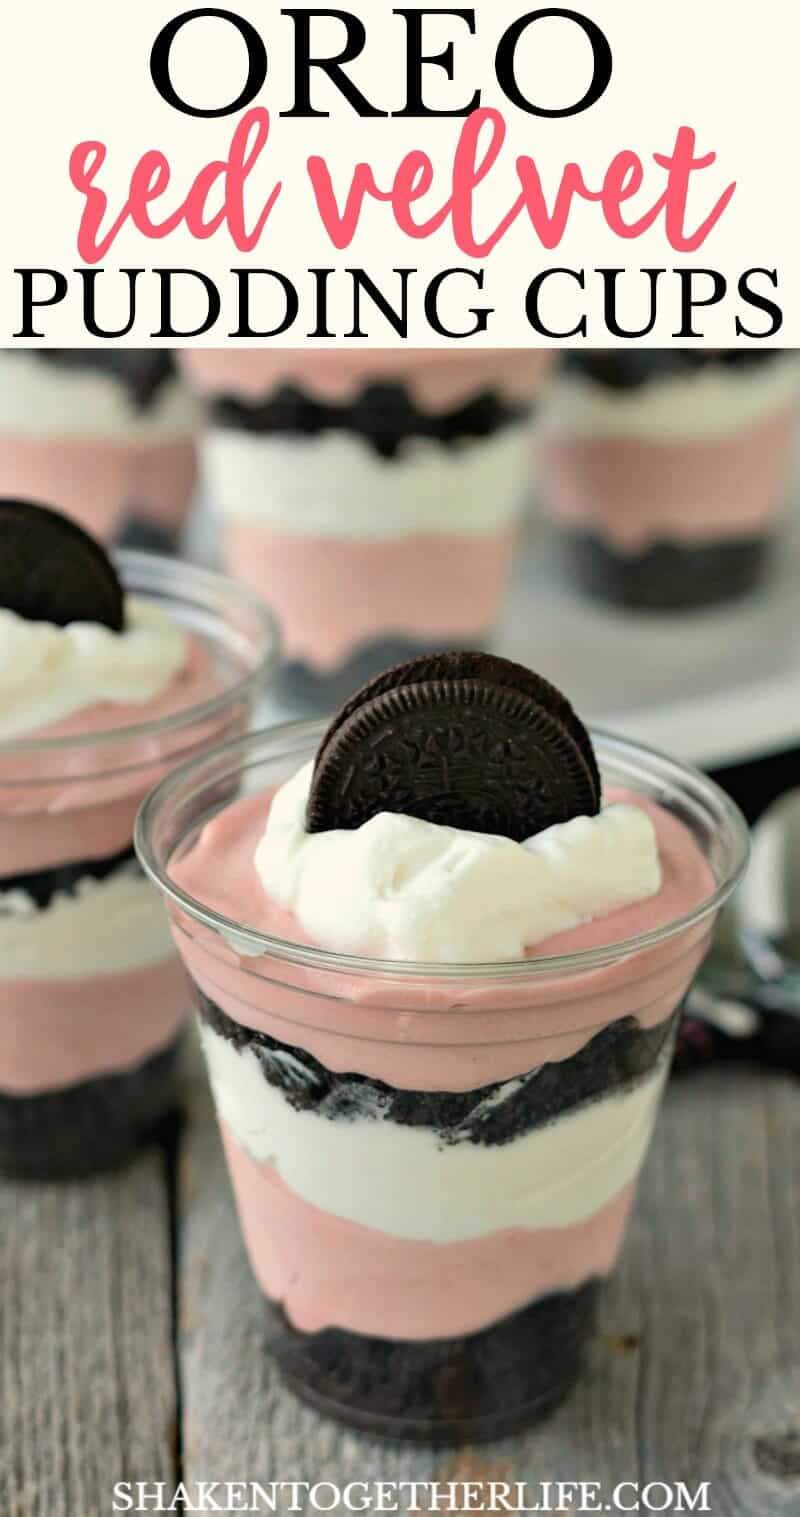 Oreo meets red velvet in these easy layered Oreo Red Velvet Pudding Cups! This no bake dessert is perfect for any party, potluck or get together!